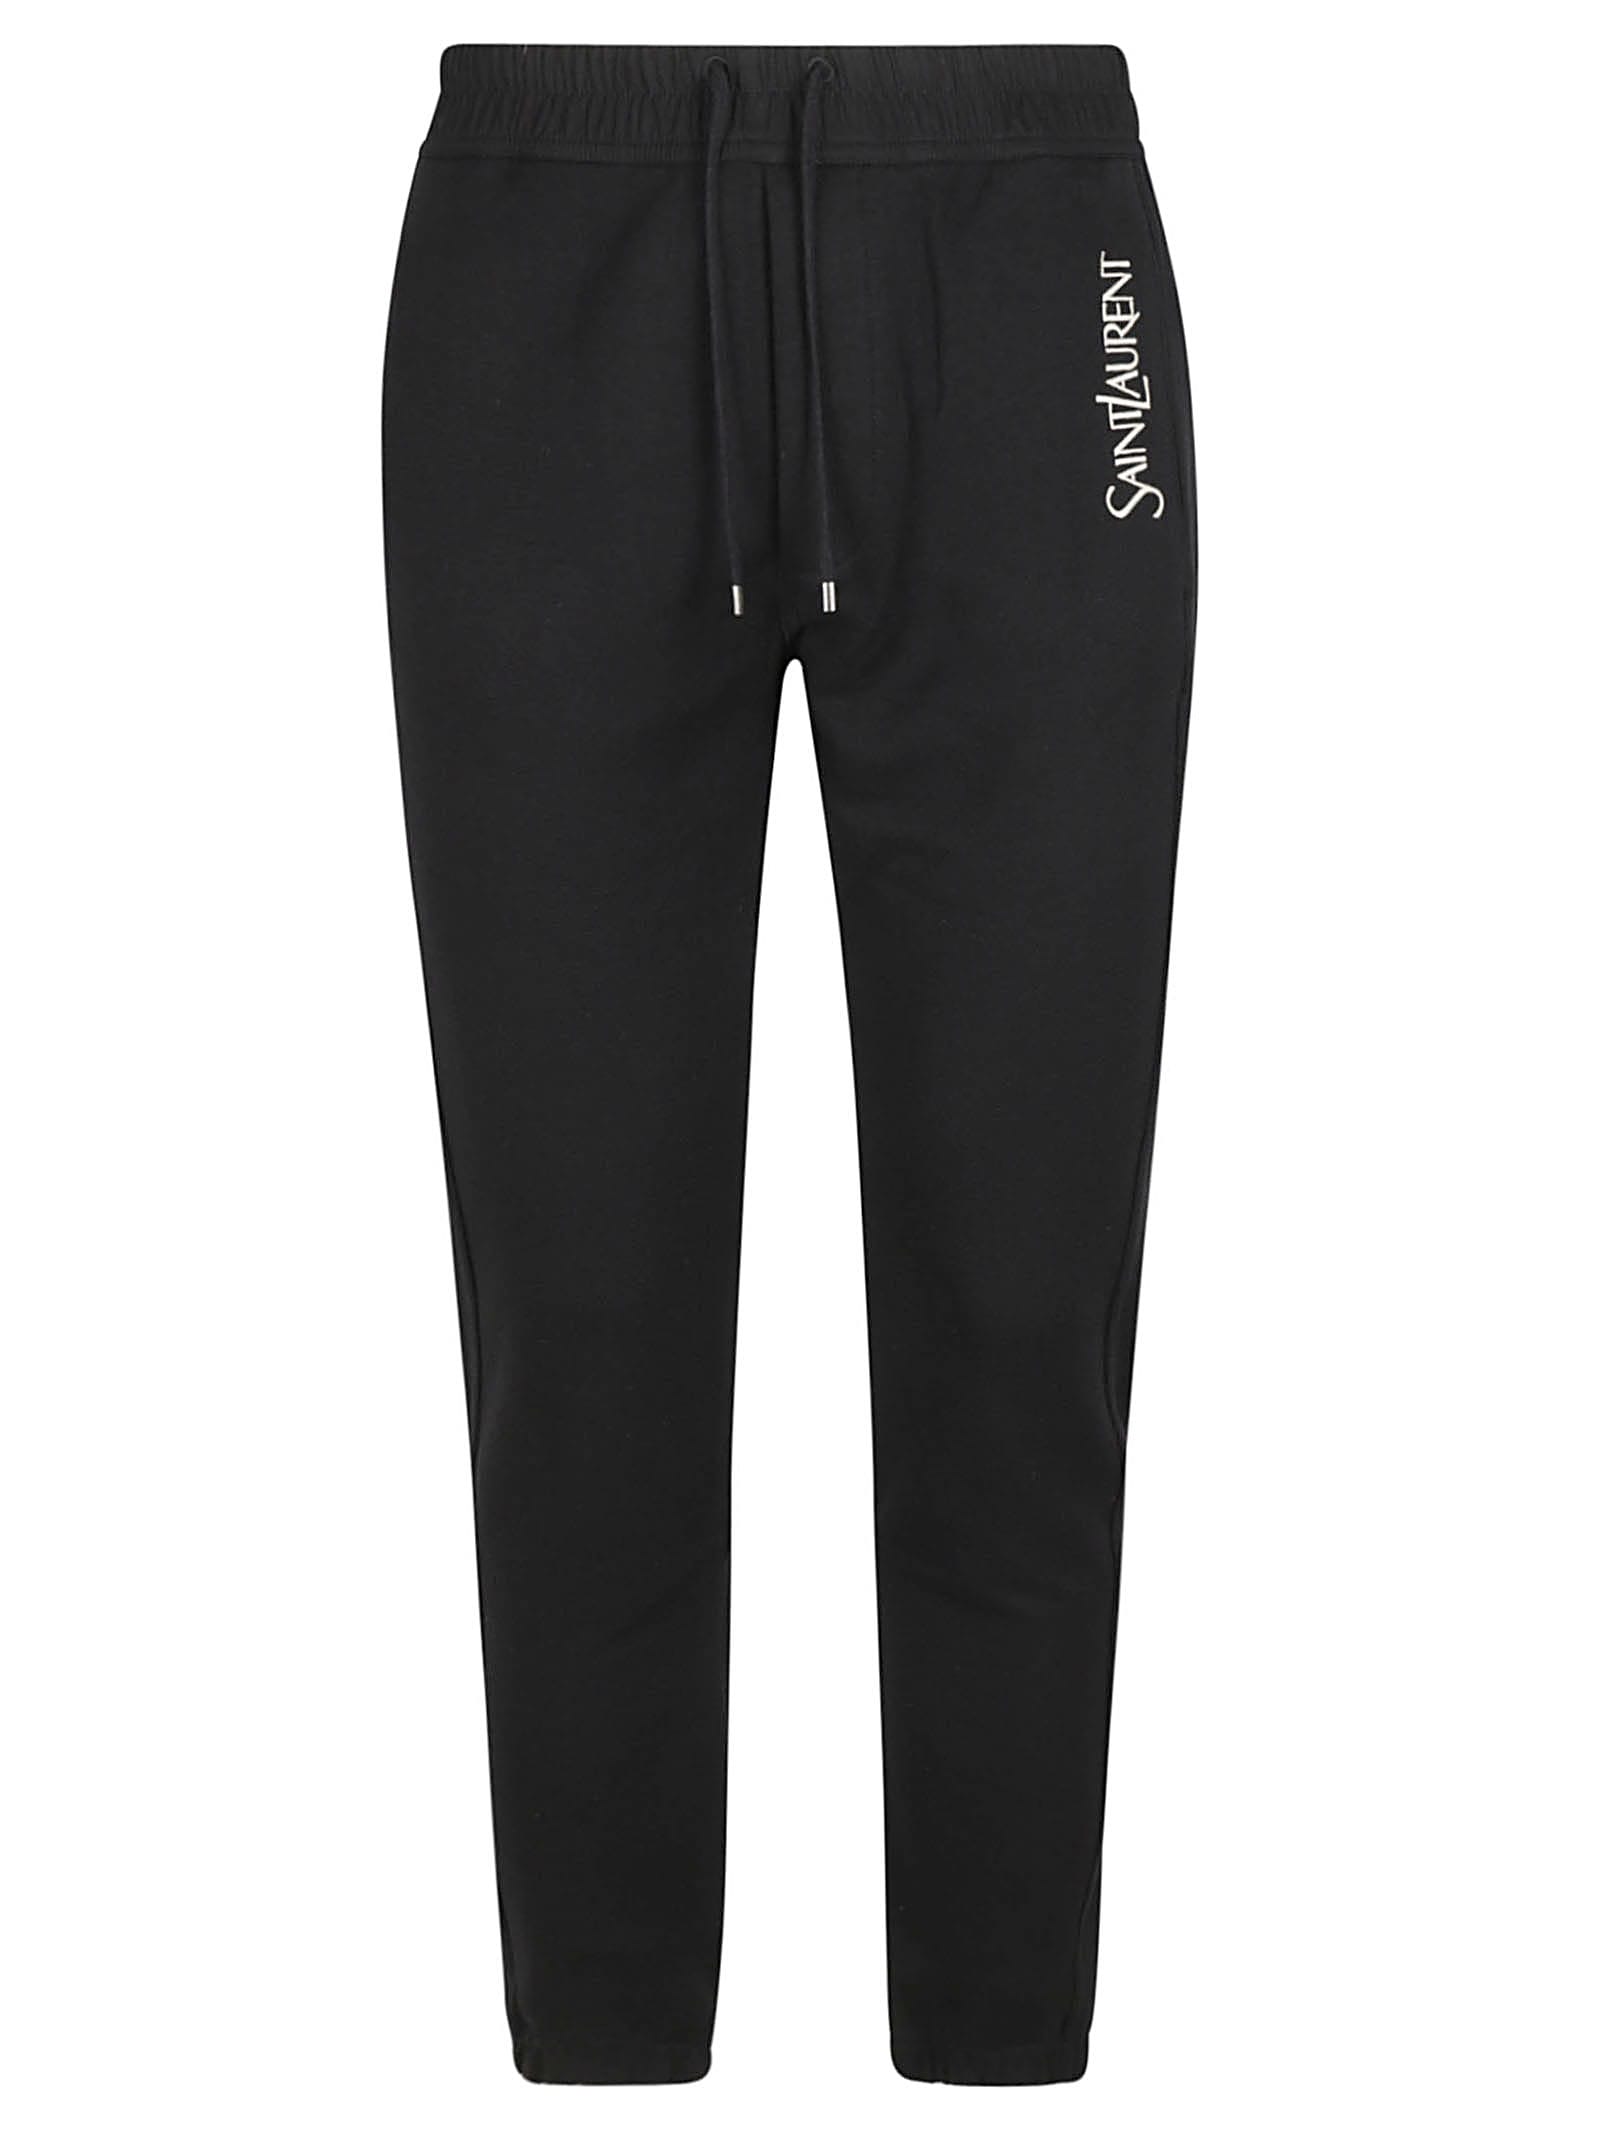 SAINT LAURENT DRAWSTRING WAIST LOGO EMBROIDERED TRACK trousers